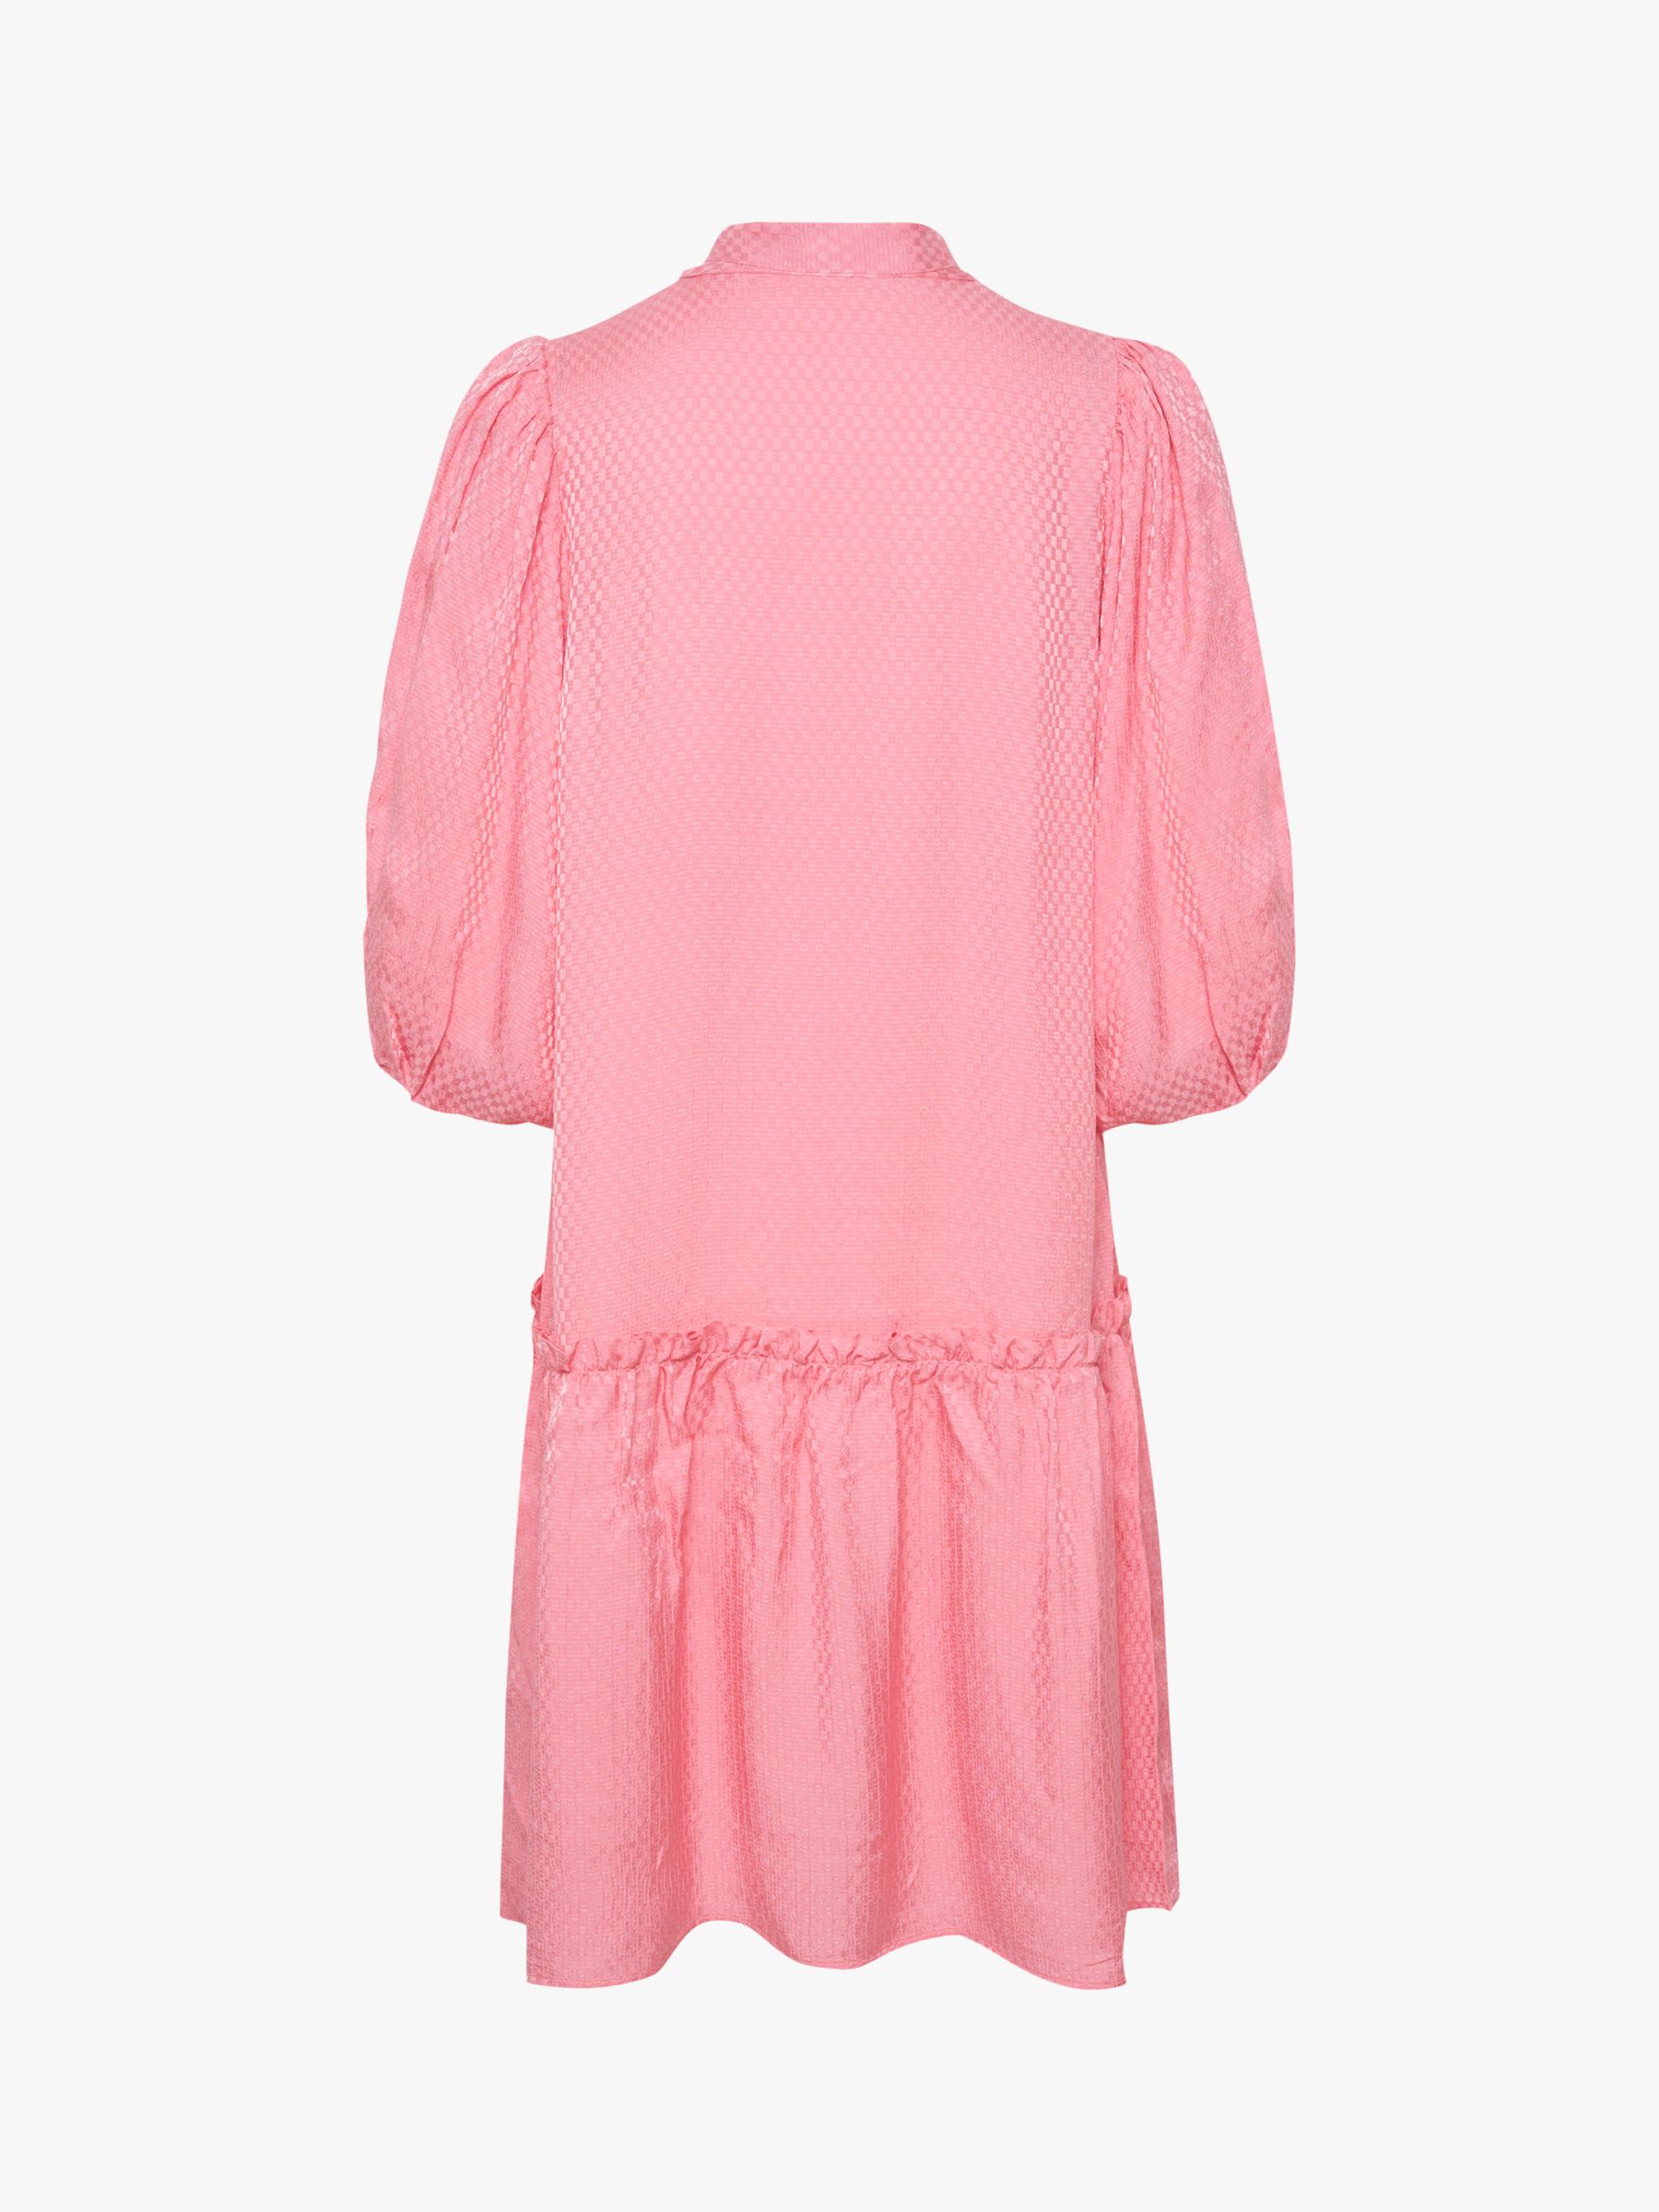 Buy Part Two Tisha Relaxed Fit Half Sleeve Knee Length Dress, Flamingo Plume Online at johnlewis.com